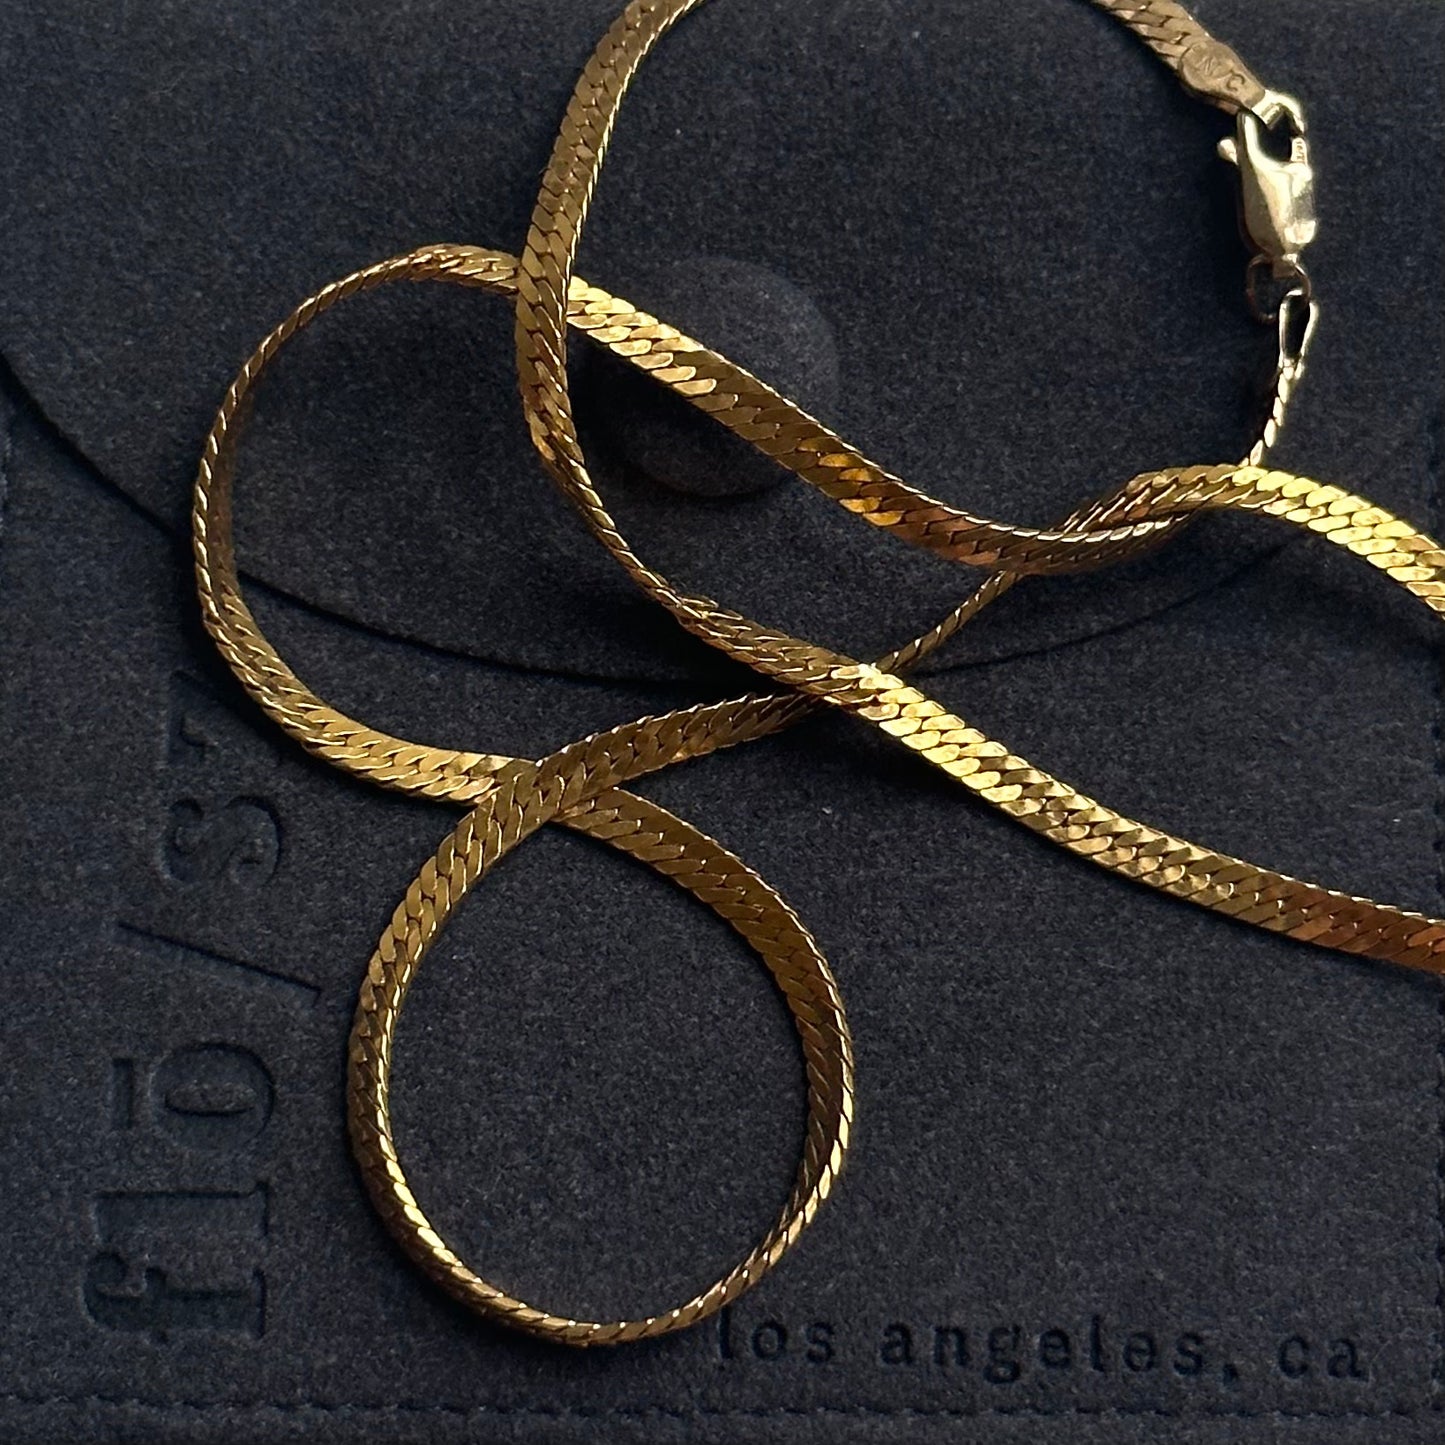 Thick gold gold-filled herringbone chain for everyday sensitive skin hypoallergenic gold accessories